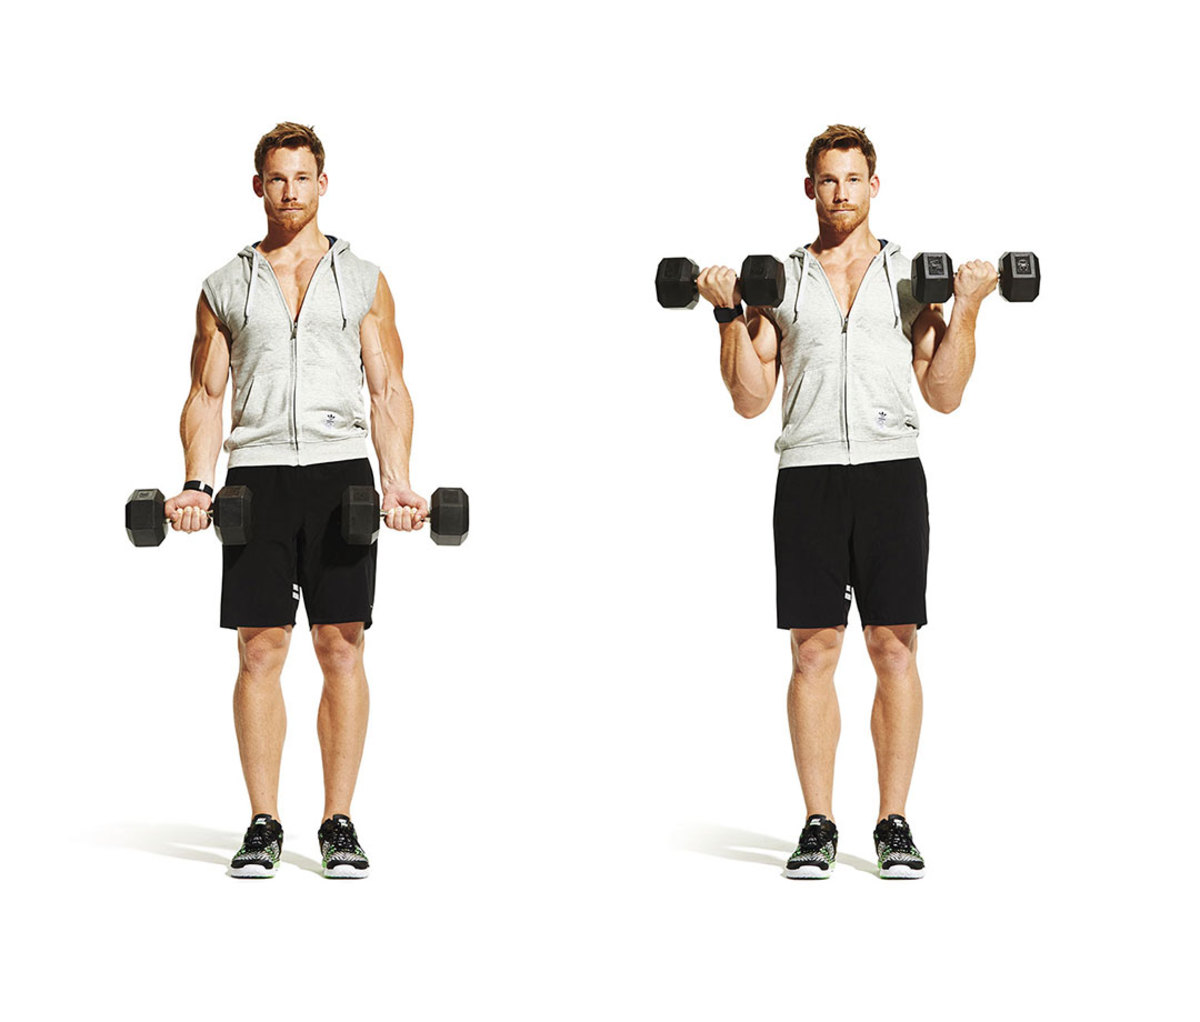 Man in athletic apparel doing dumbbell biceps curl